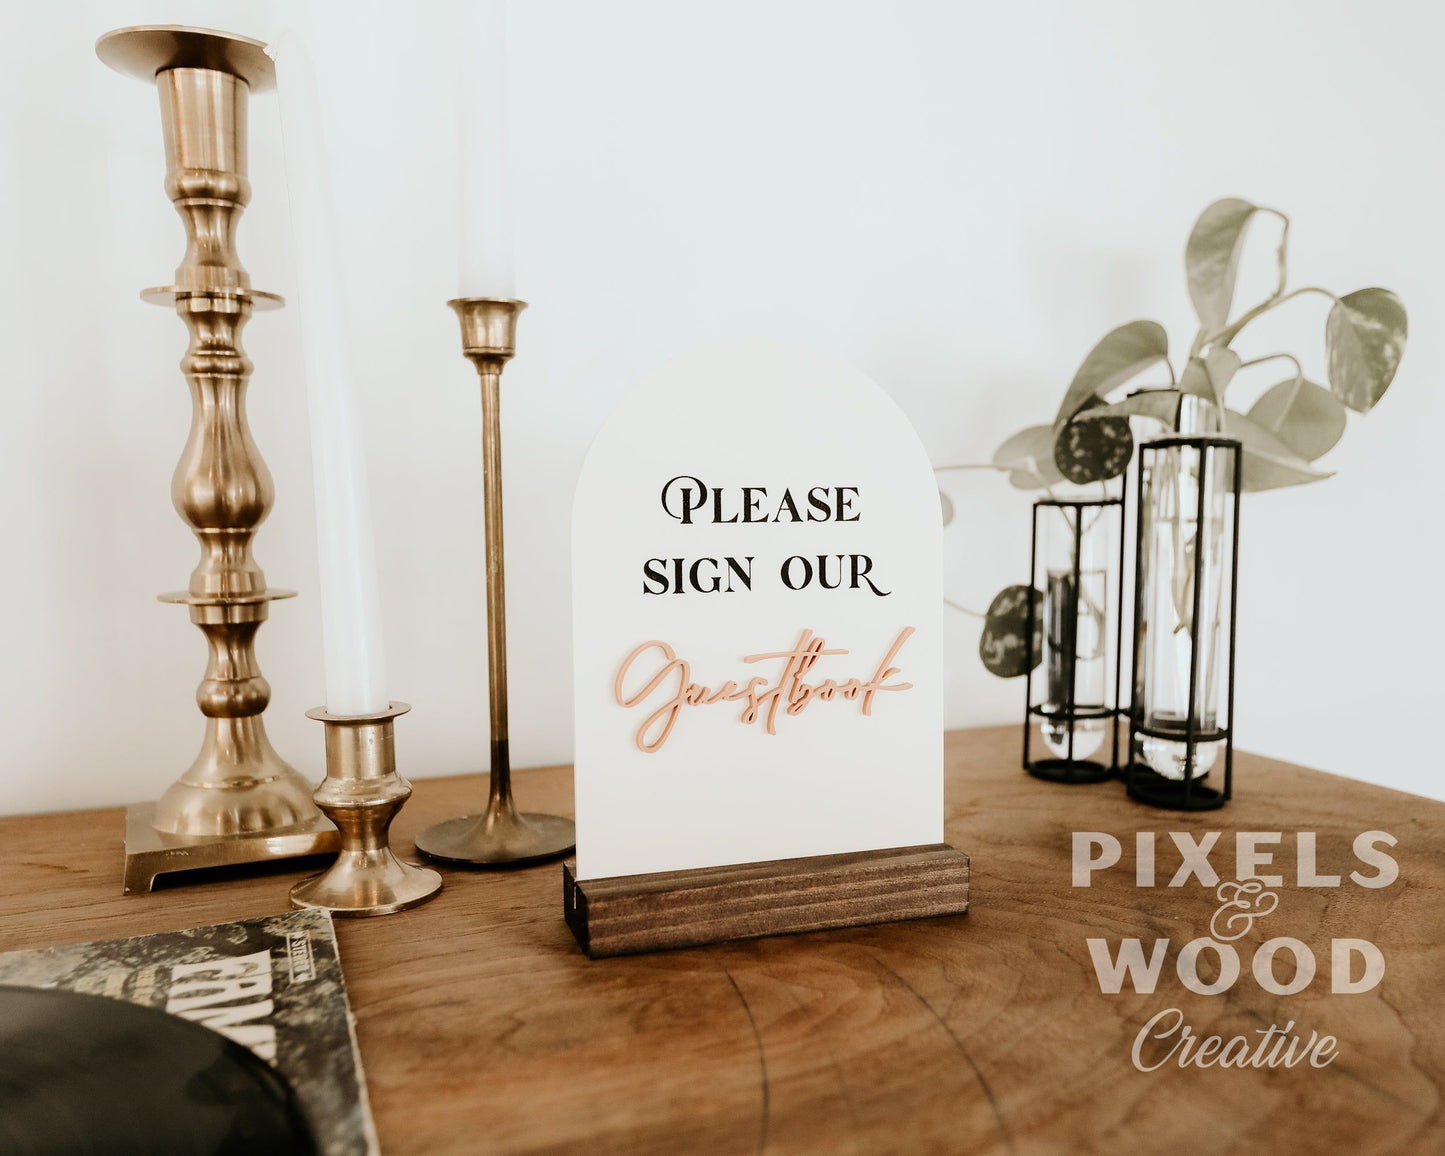 Sign Our Guestbook Wedding Signage